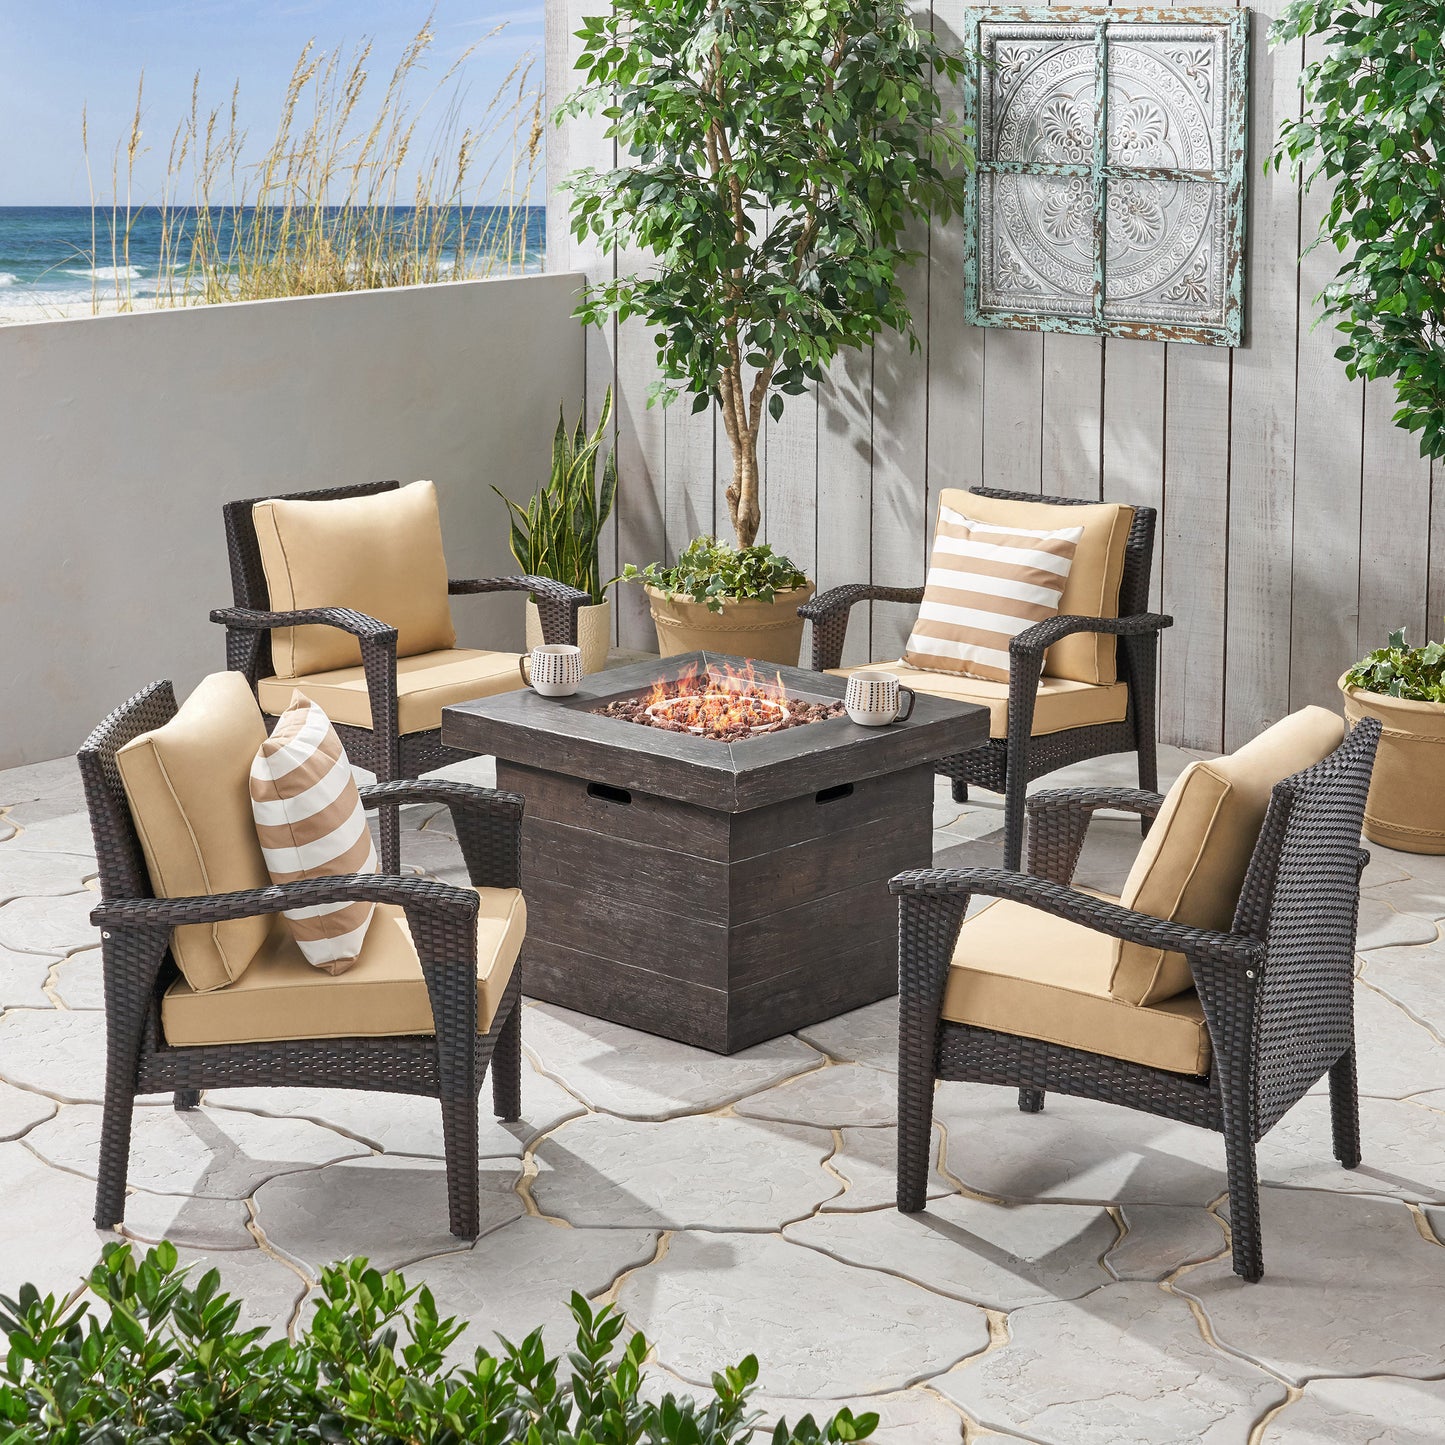 Mahala Outdoor 4 Club Chair Chat Set with Fire Pit